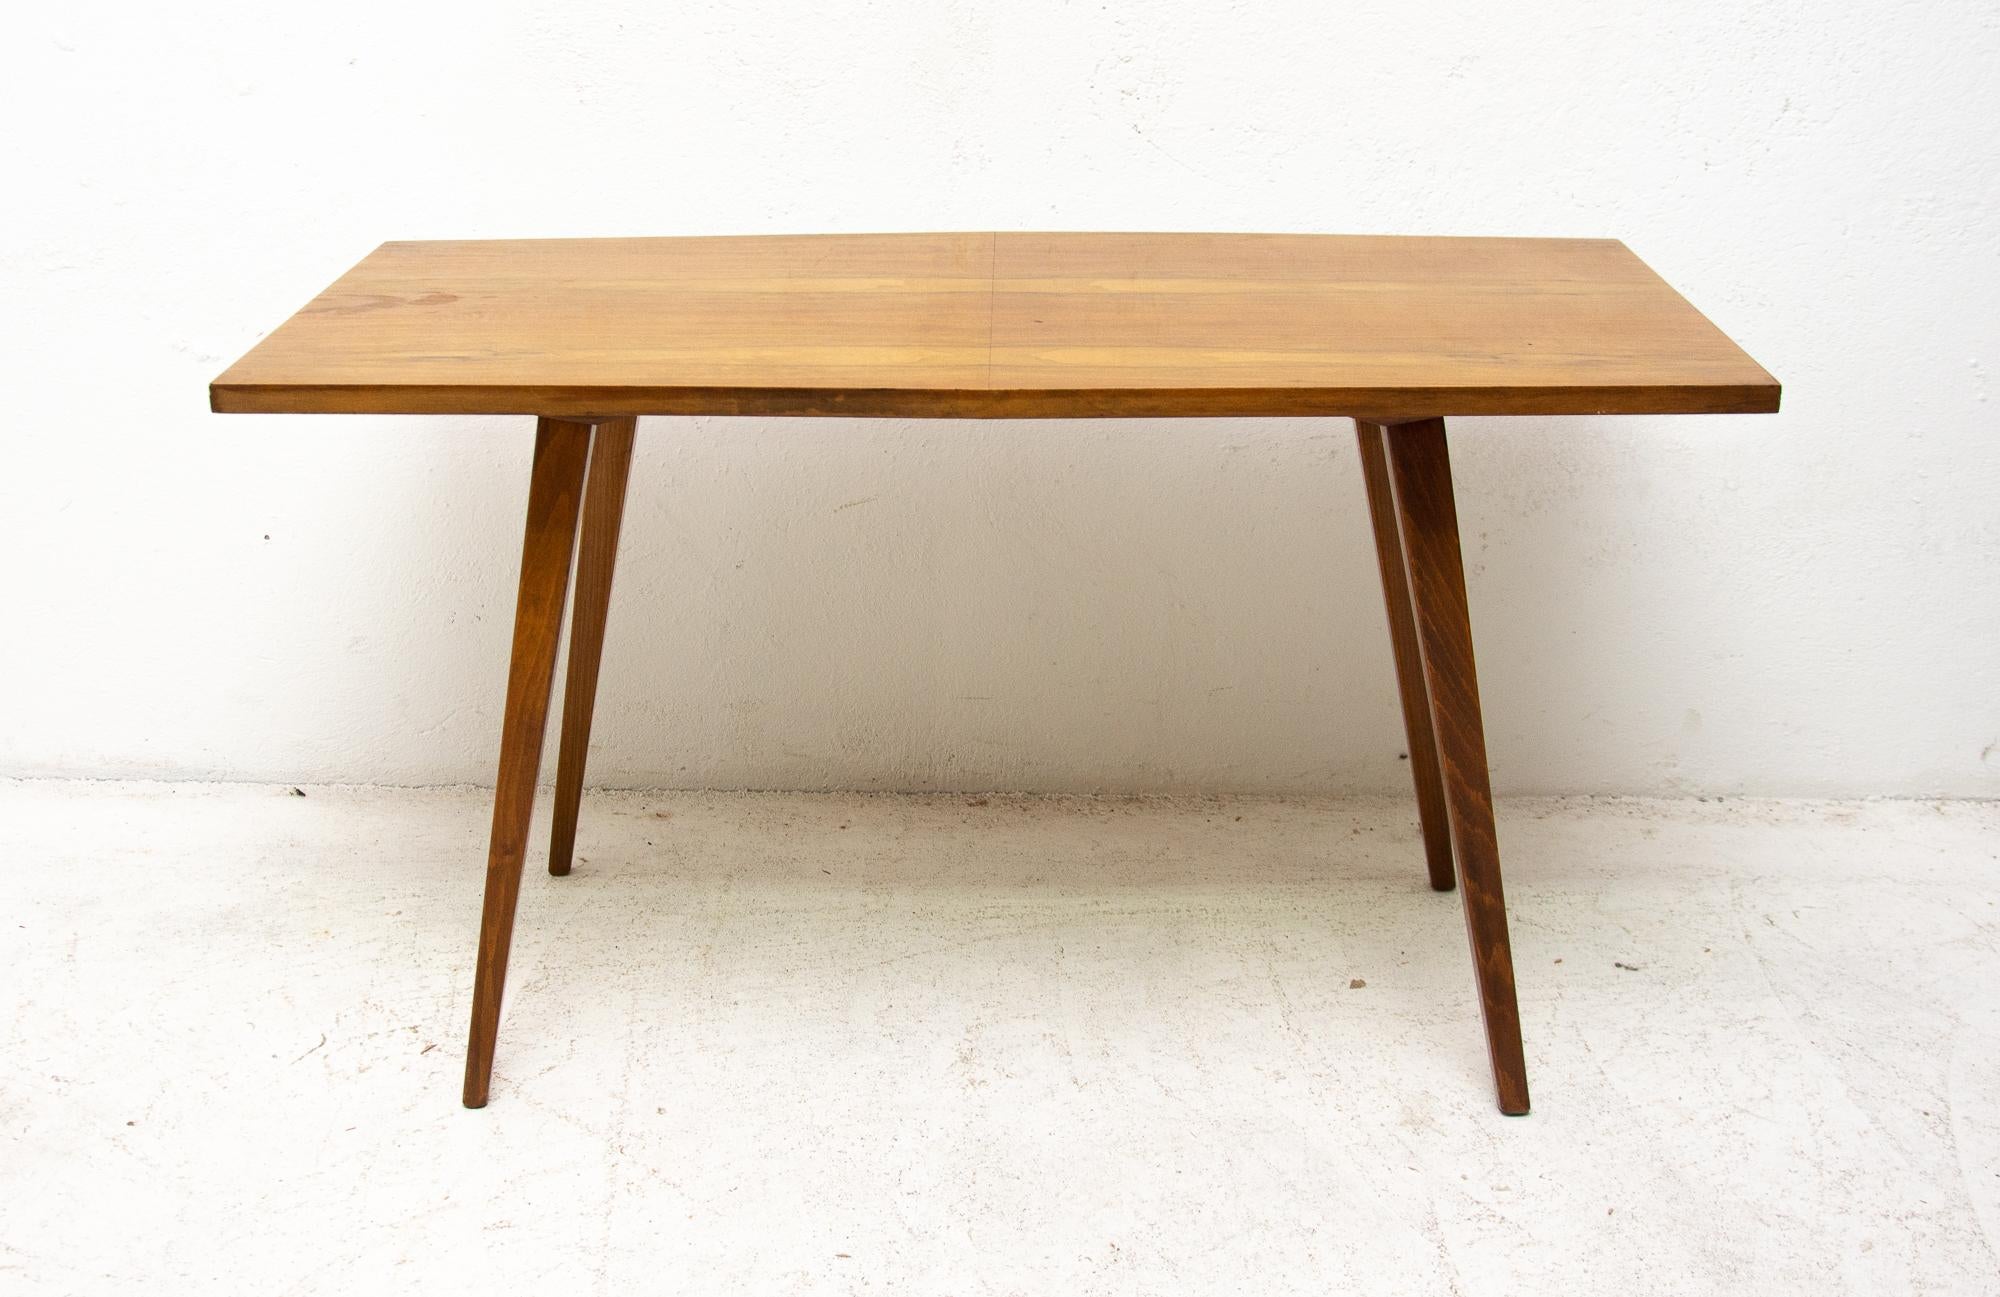 Modern occasional coffee table designed by František Jirák for Tatra nábytok, it was made in the 1960s in the former Czechoslovakia.

Fashioned in wood with walnut veneer. In good Vintage condition, there is a minor stain on only one place on the